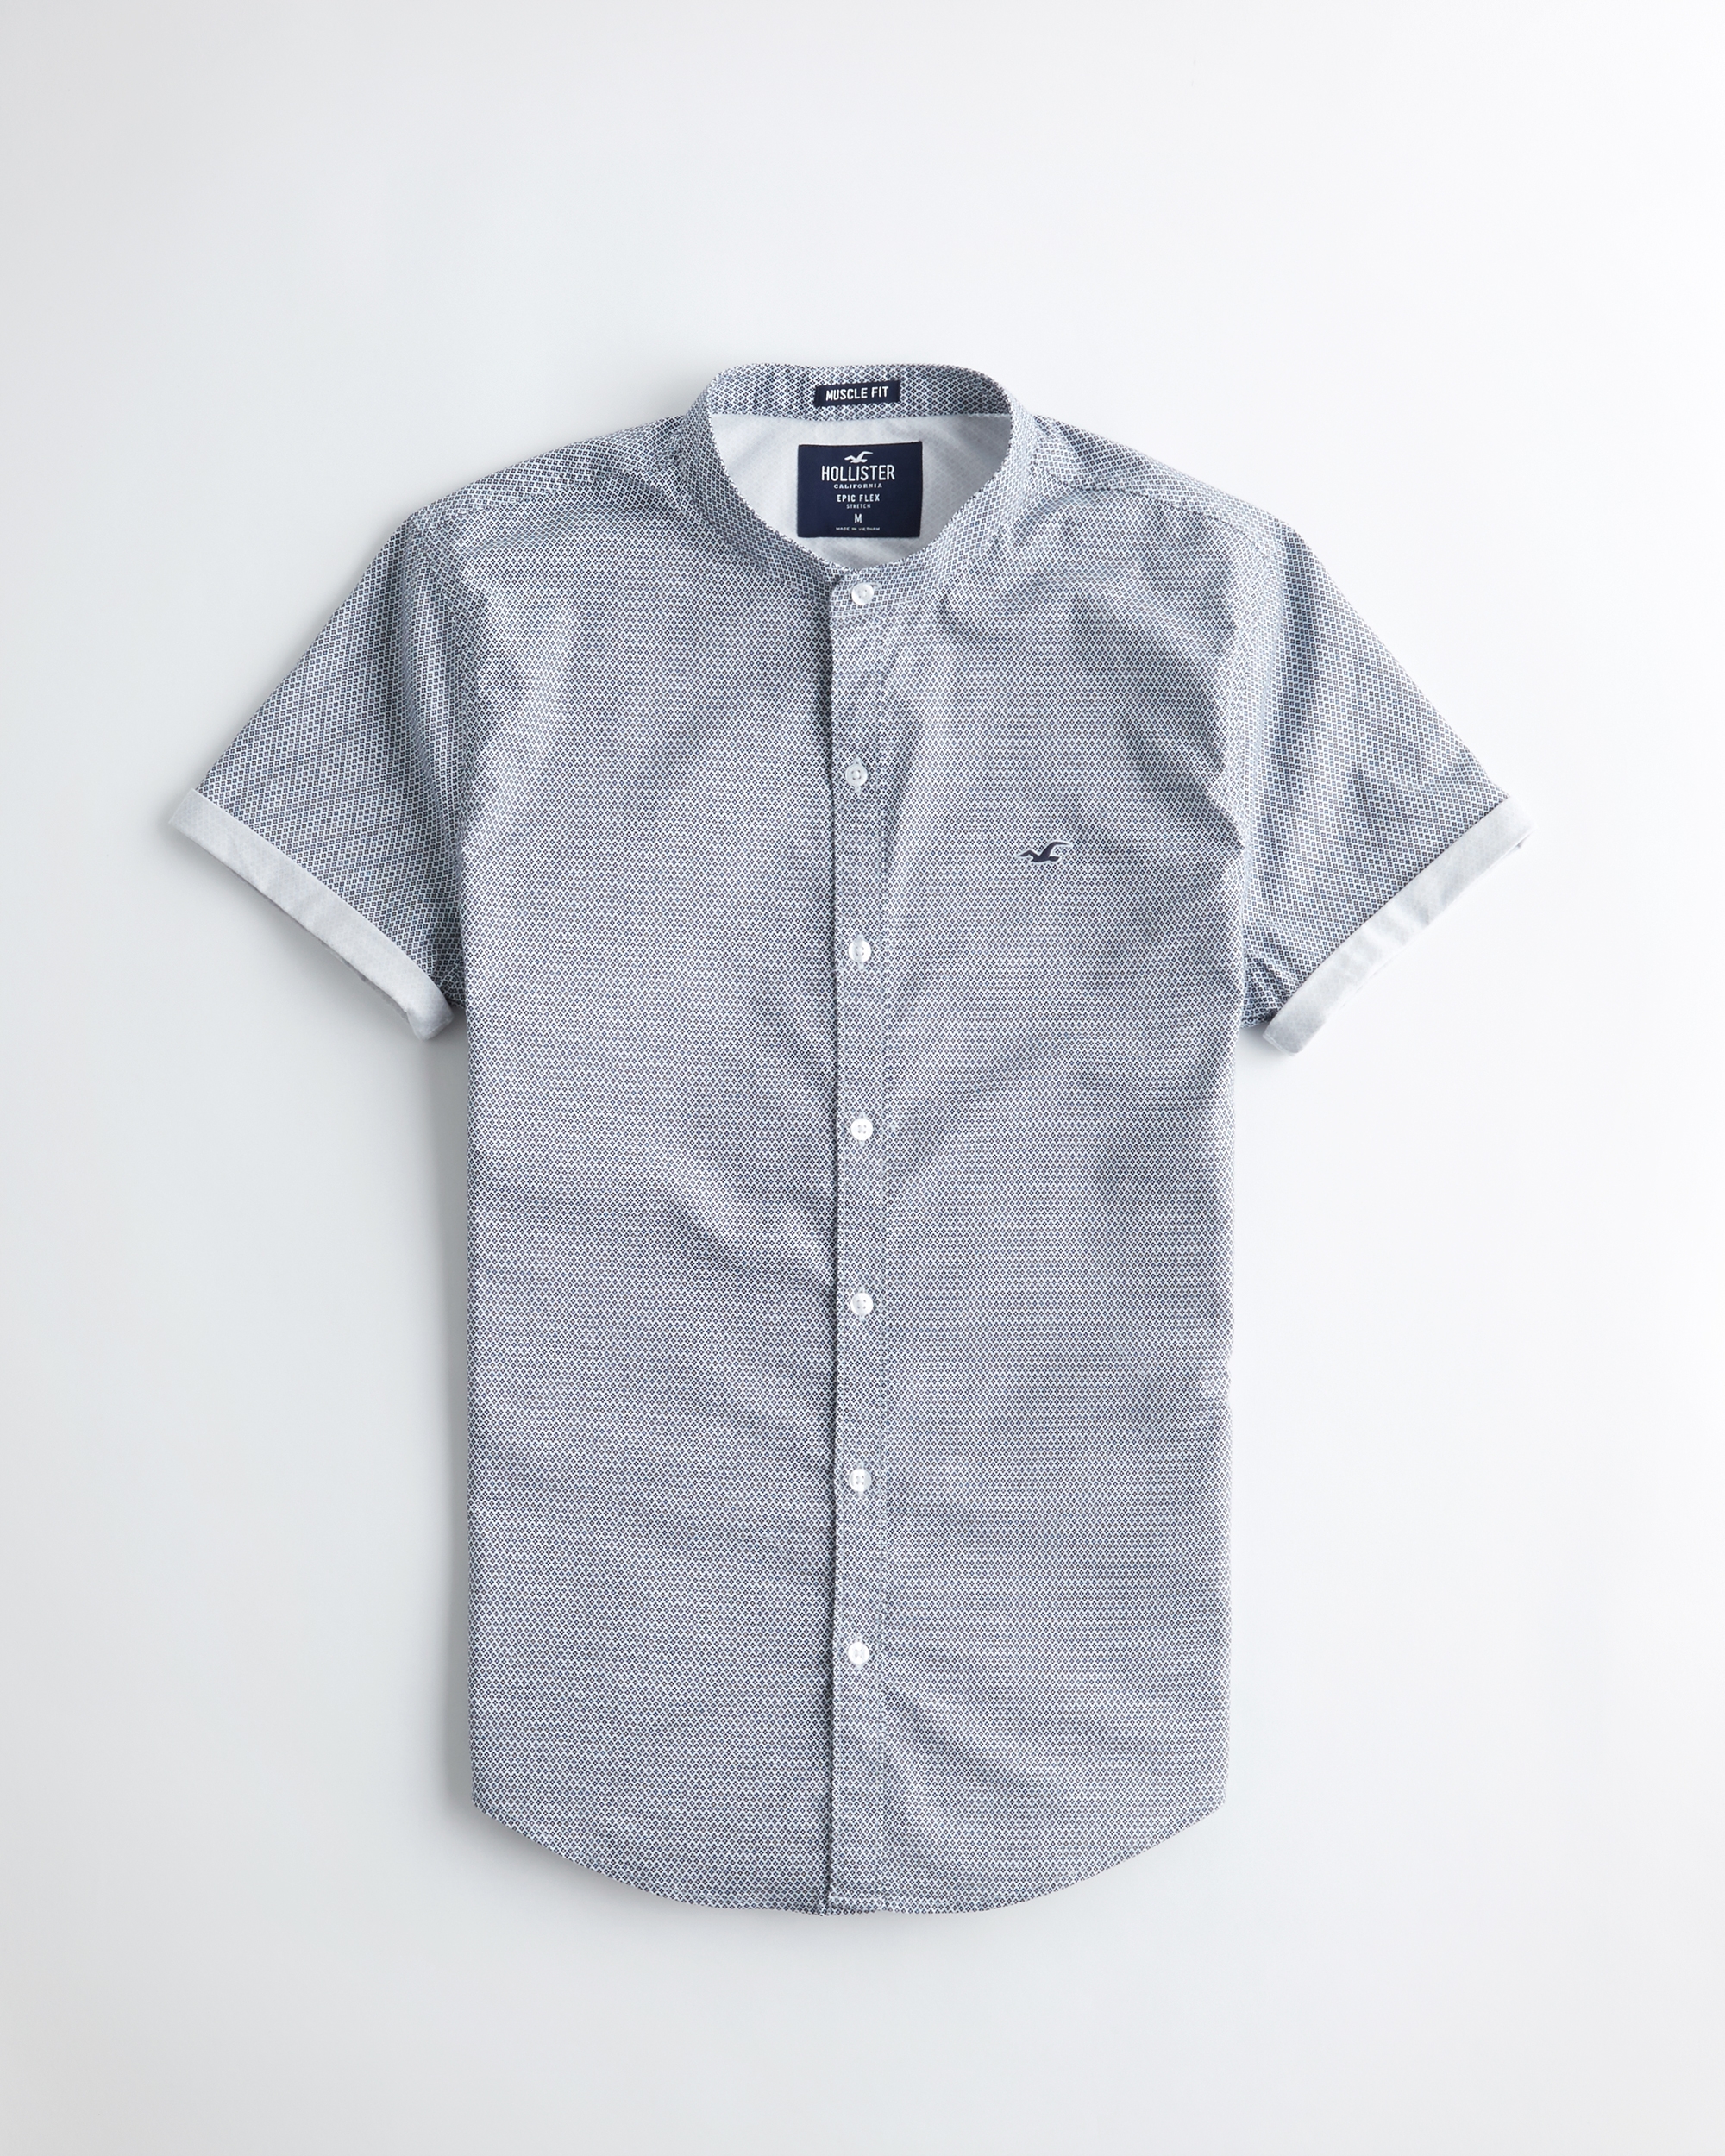 Button Down Shirts for Guys | Hollister Co.